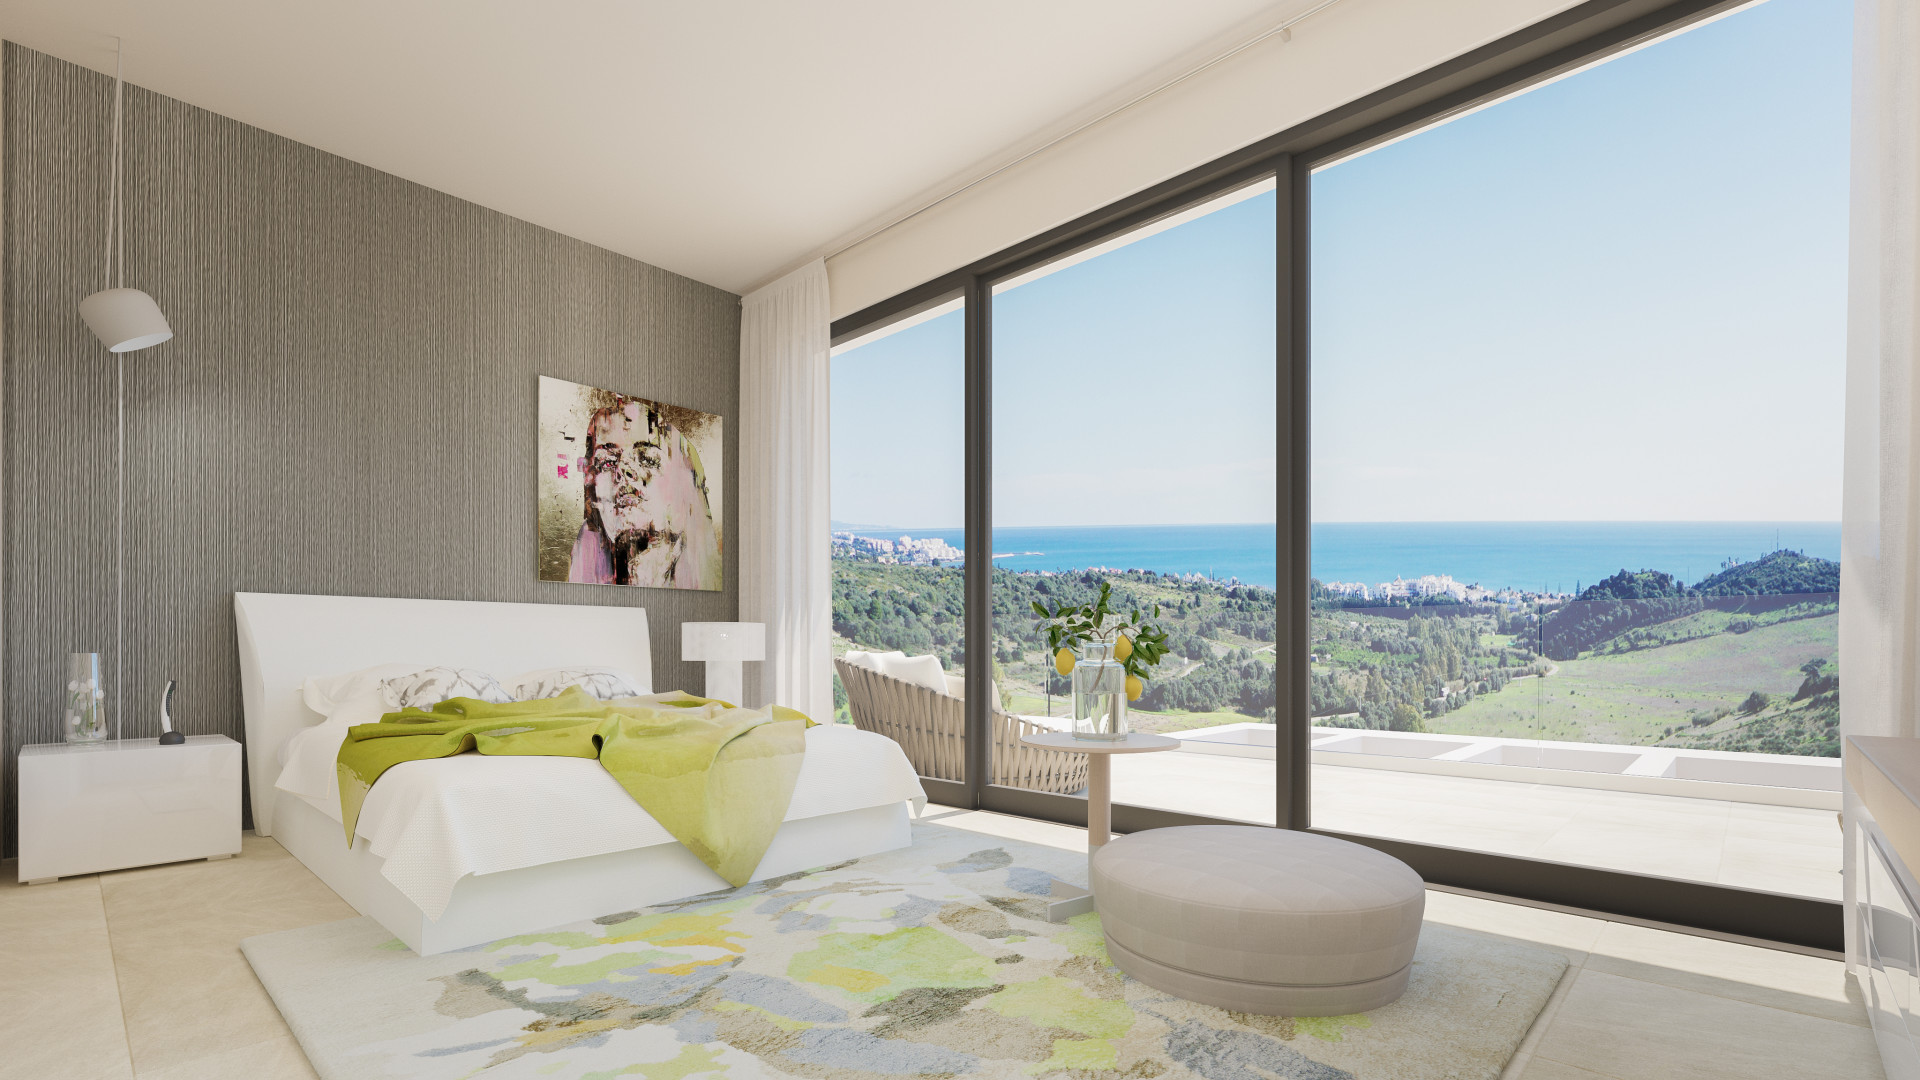 New development of modern luxury apartments for sale in Estepona